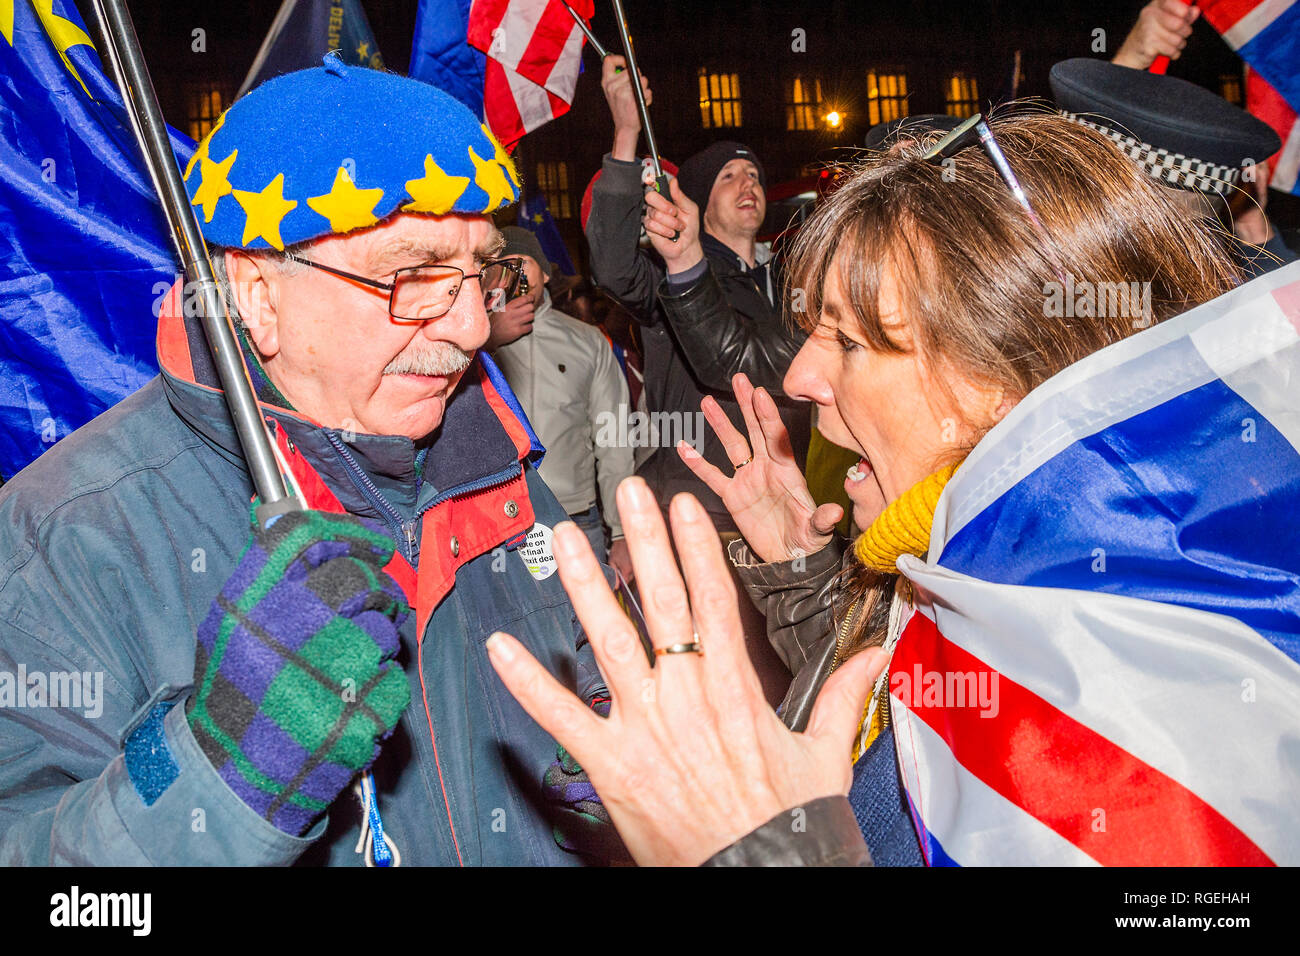 London, UK. 29th January, 2019. Conversations between opposing sides are passionate and become slightly heated - Leave means leave and SODEM, pro EU, protestors continue to make their points, side by side, outside Parliament as the next vote on Theresa May's plan is due this evening. Credit: Guy Bell/Alamy Live News Stock Photo